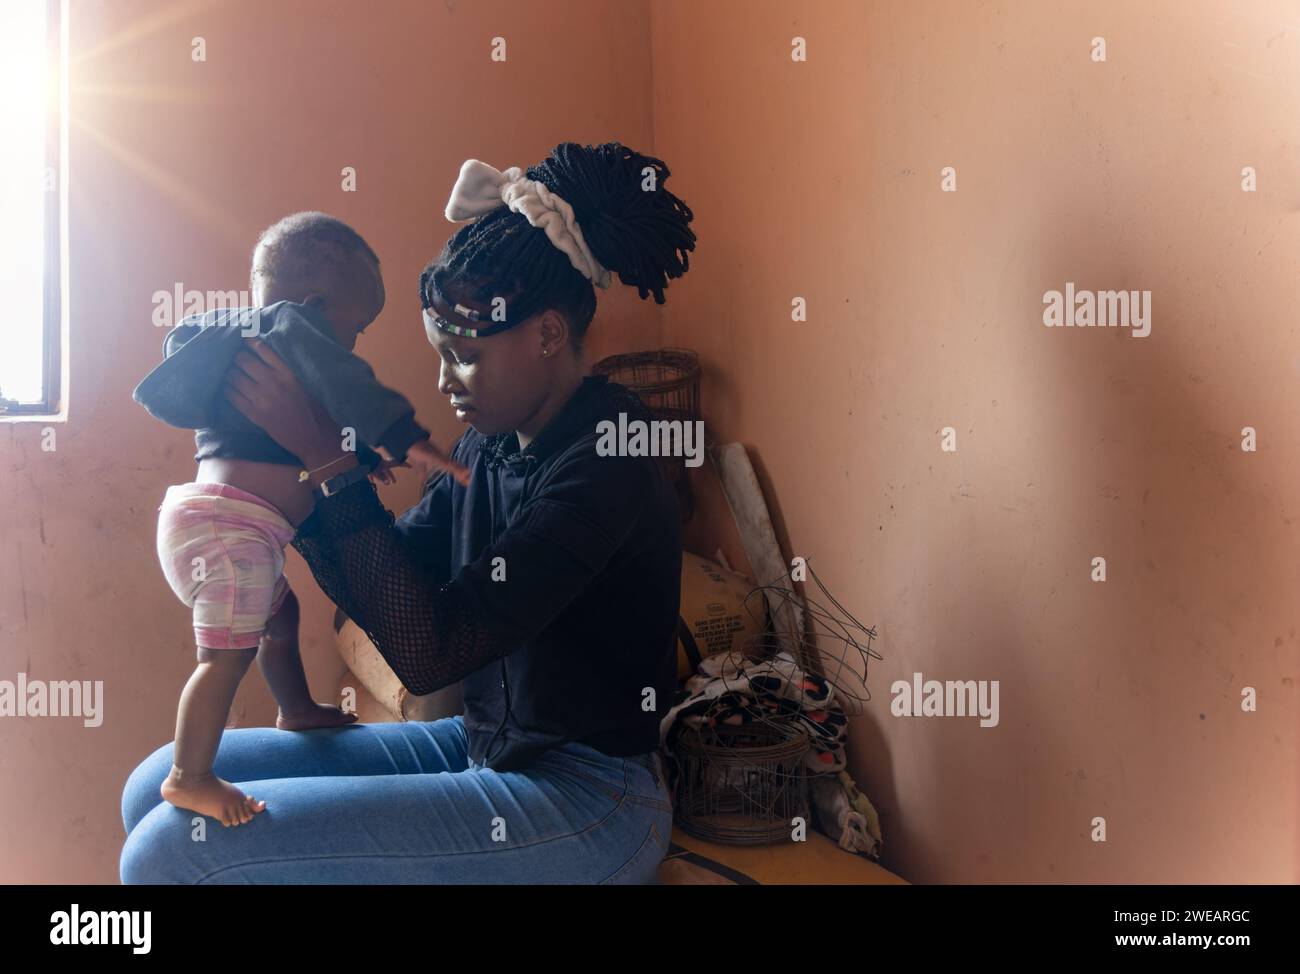 village african girl with braids, holding a baby she is sited next to the window indoors Stock Photo